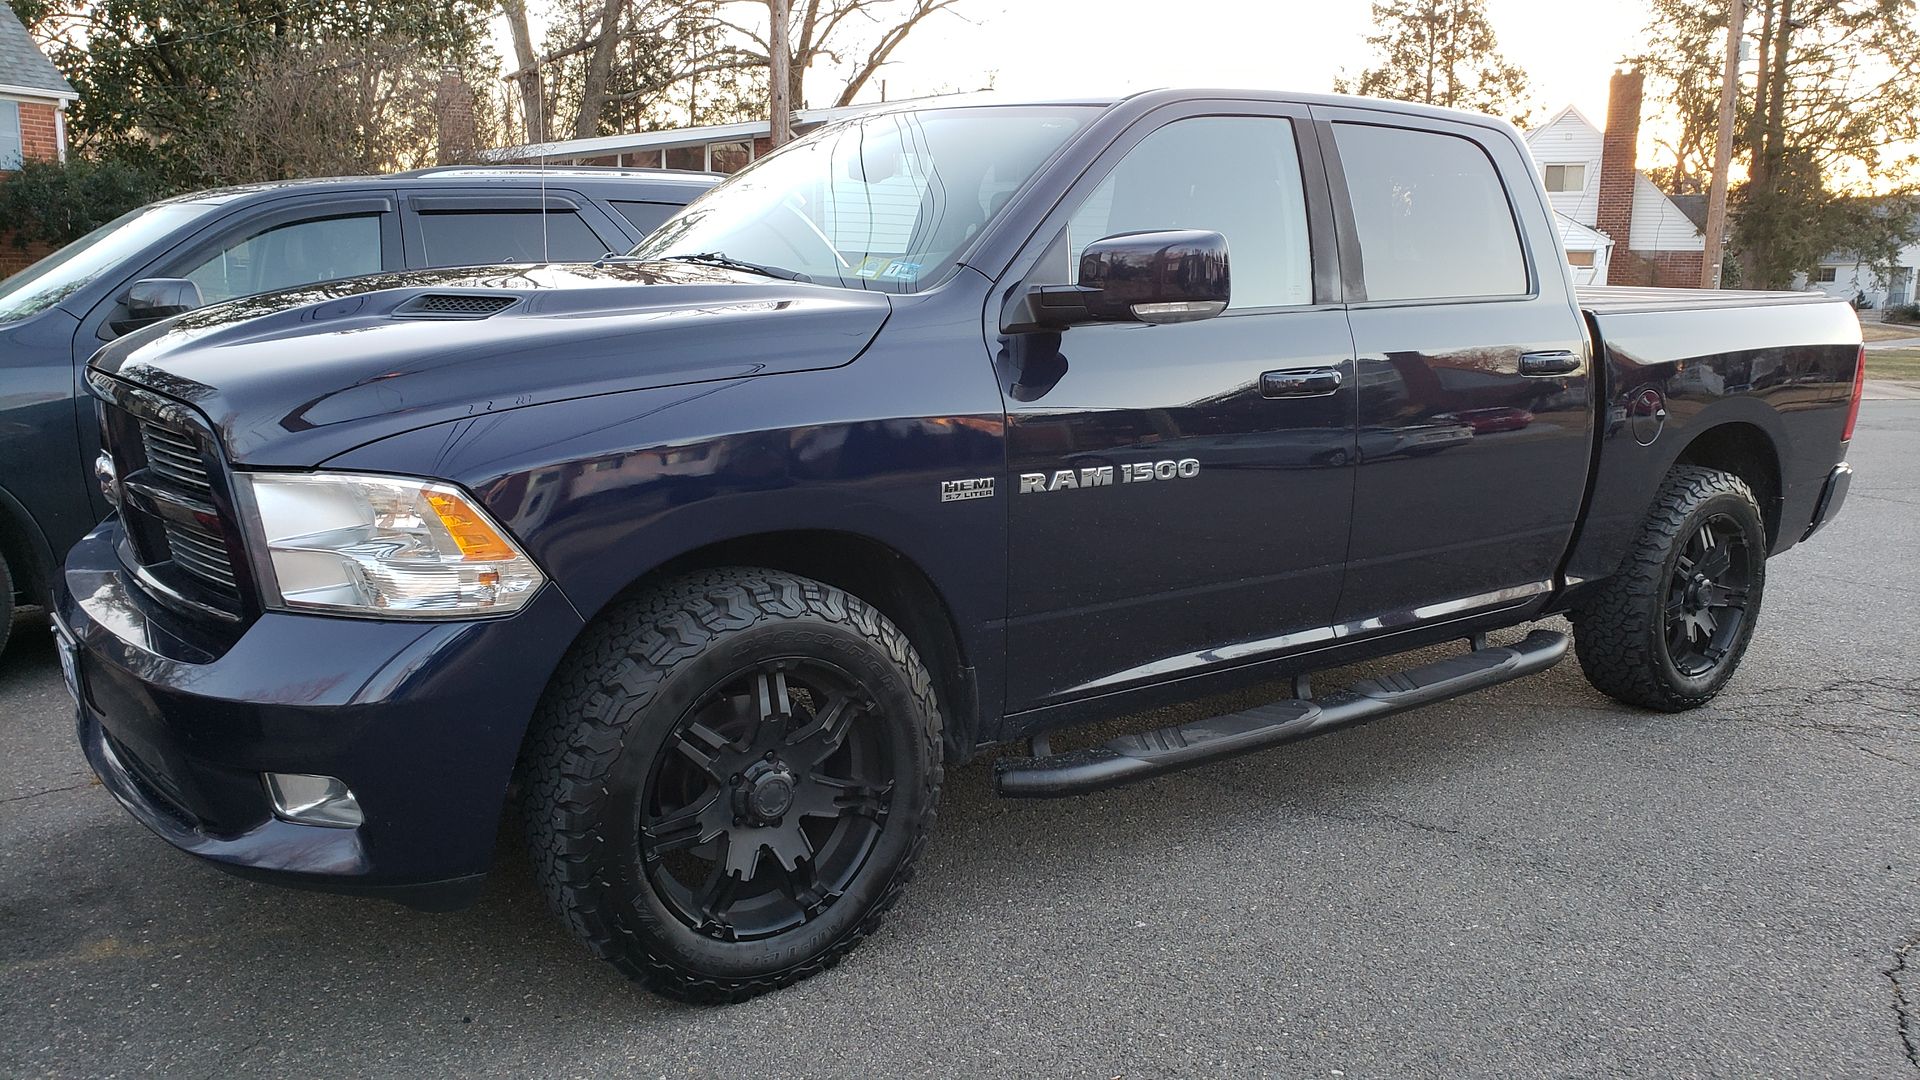 What did you do with your 4th Gen this week? | Page 2718 | DODGE RAM 4th Gen Ram No Air From Vents